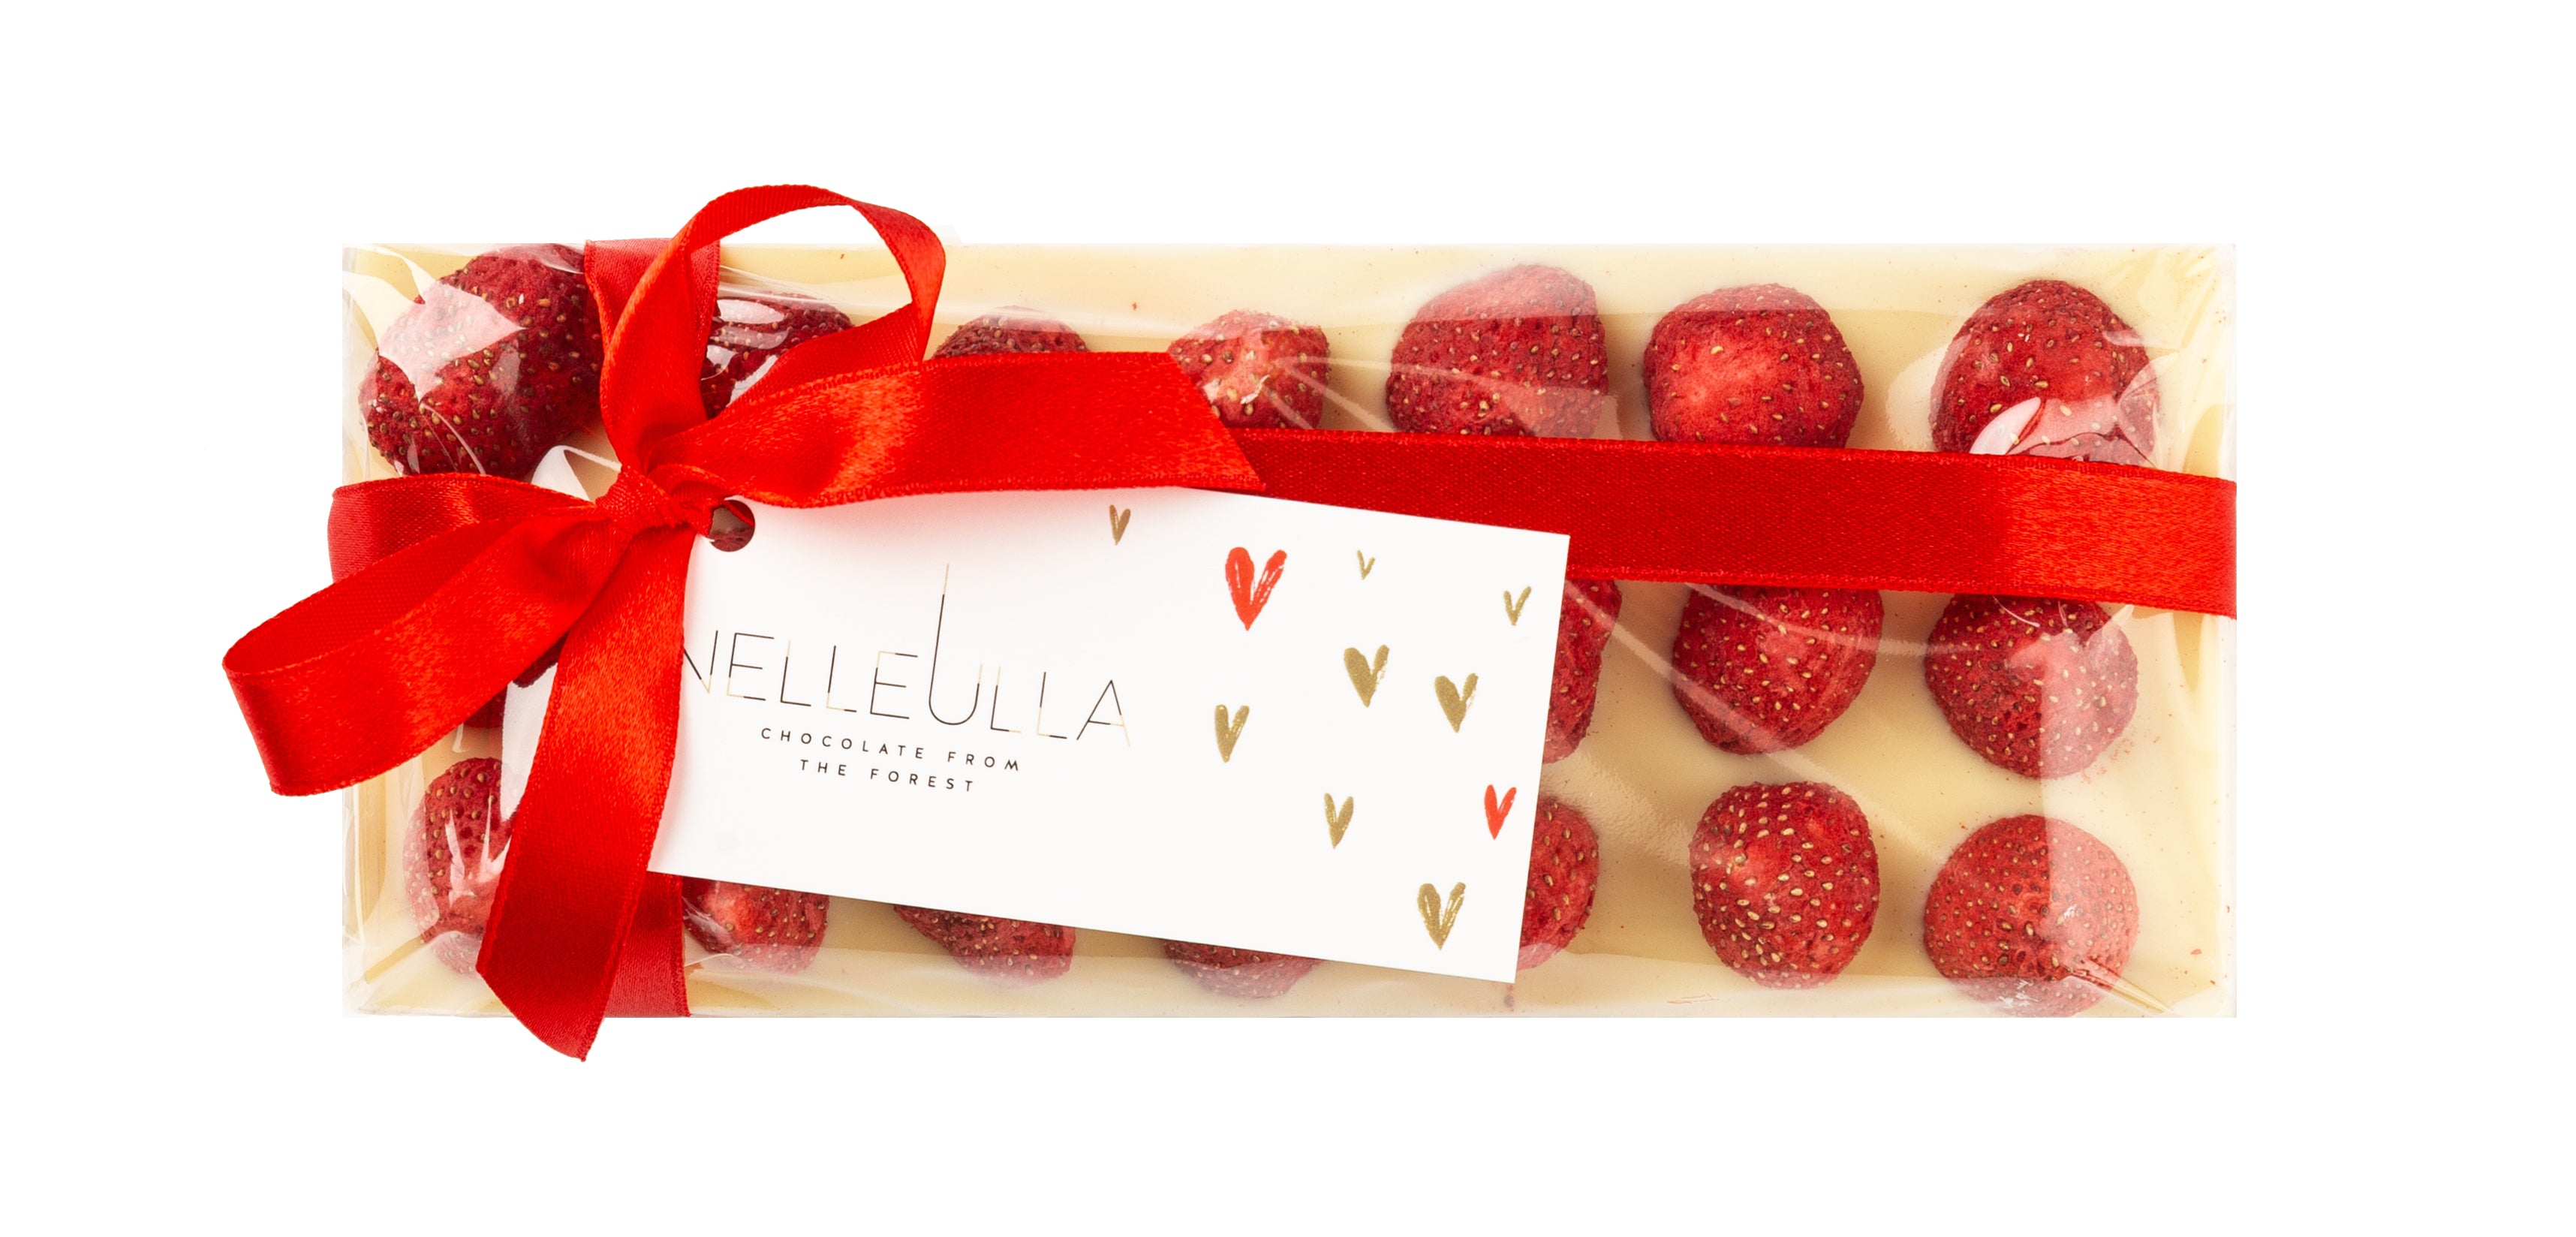 BERRY LOVE / WHITE CHOCOLATE / STRAWBERRY - with Valentine day card